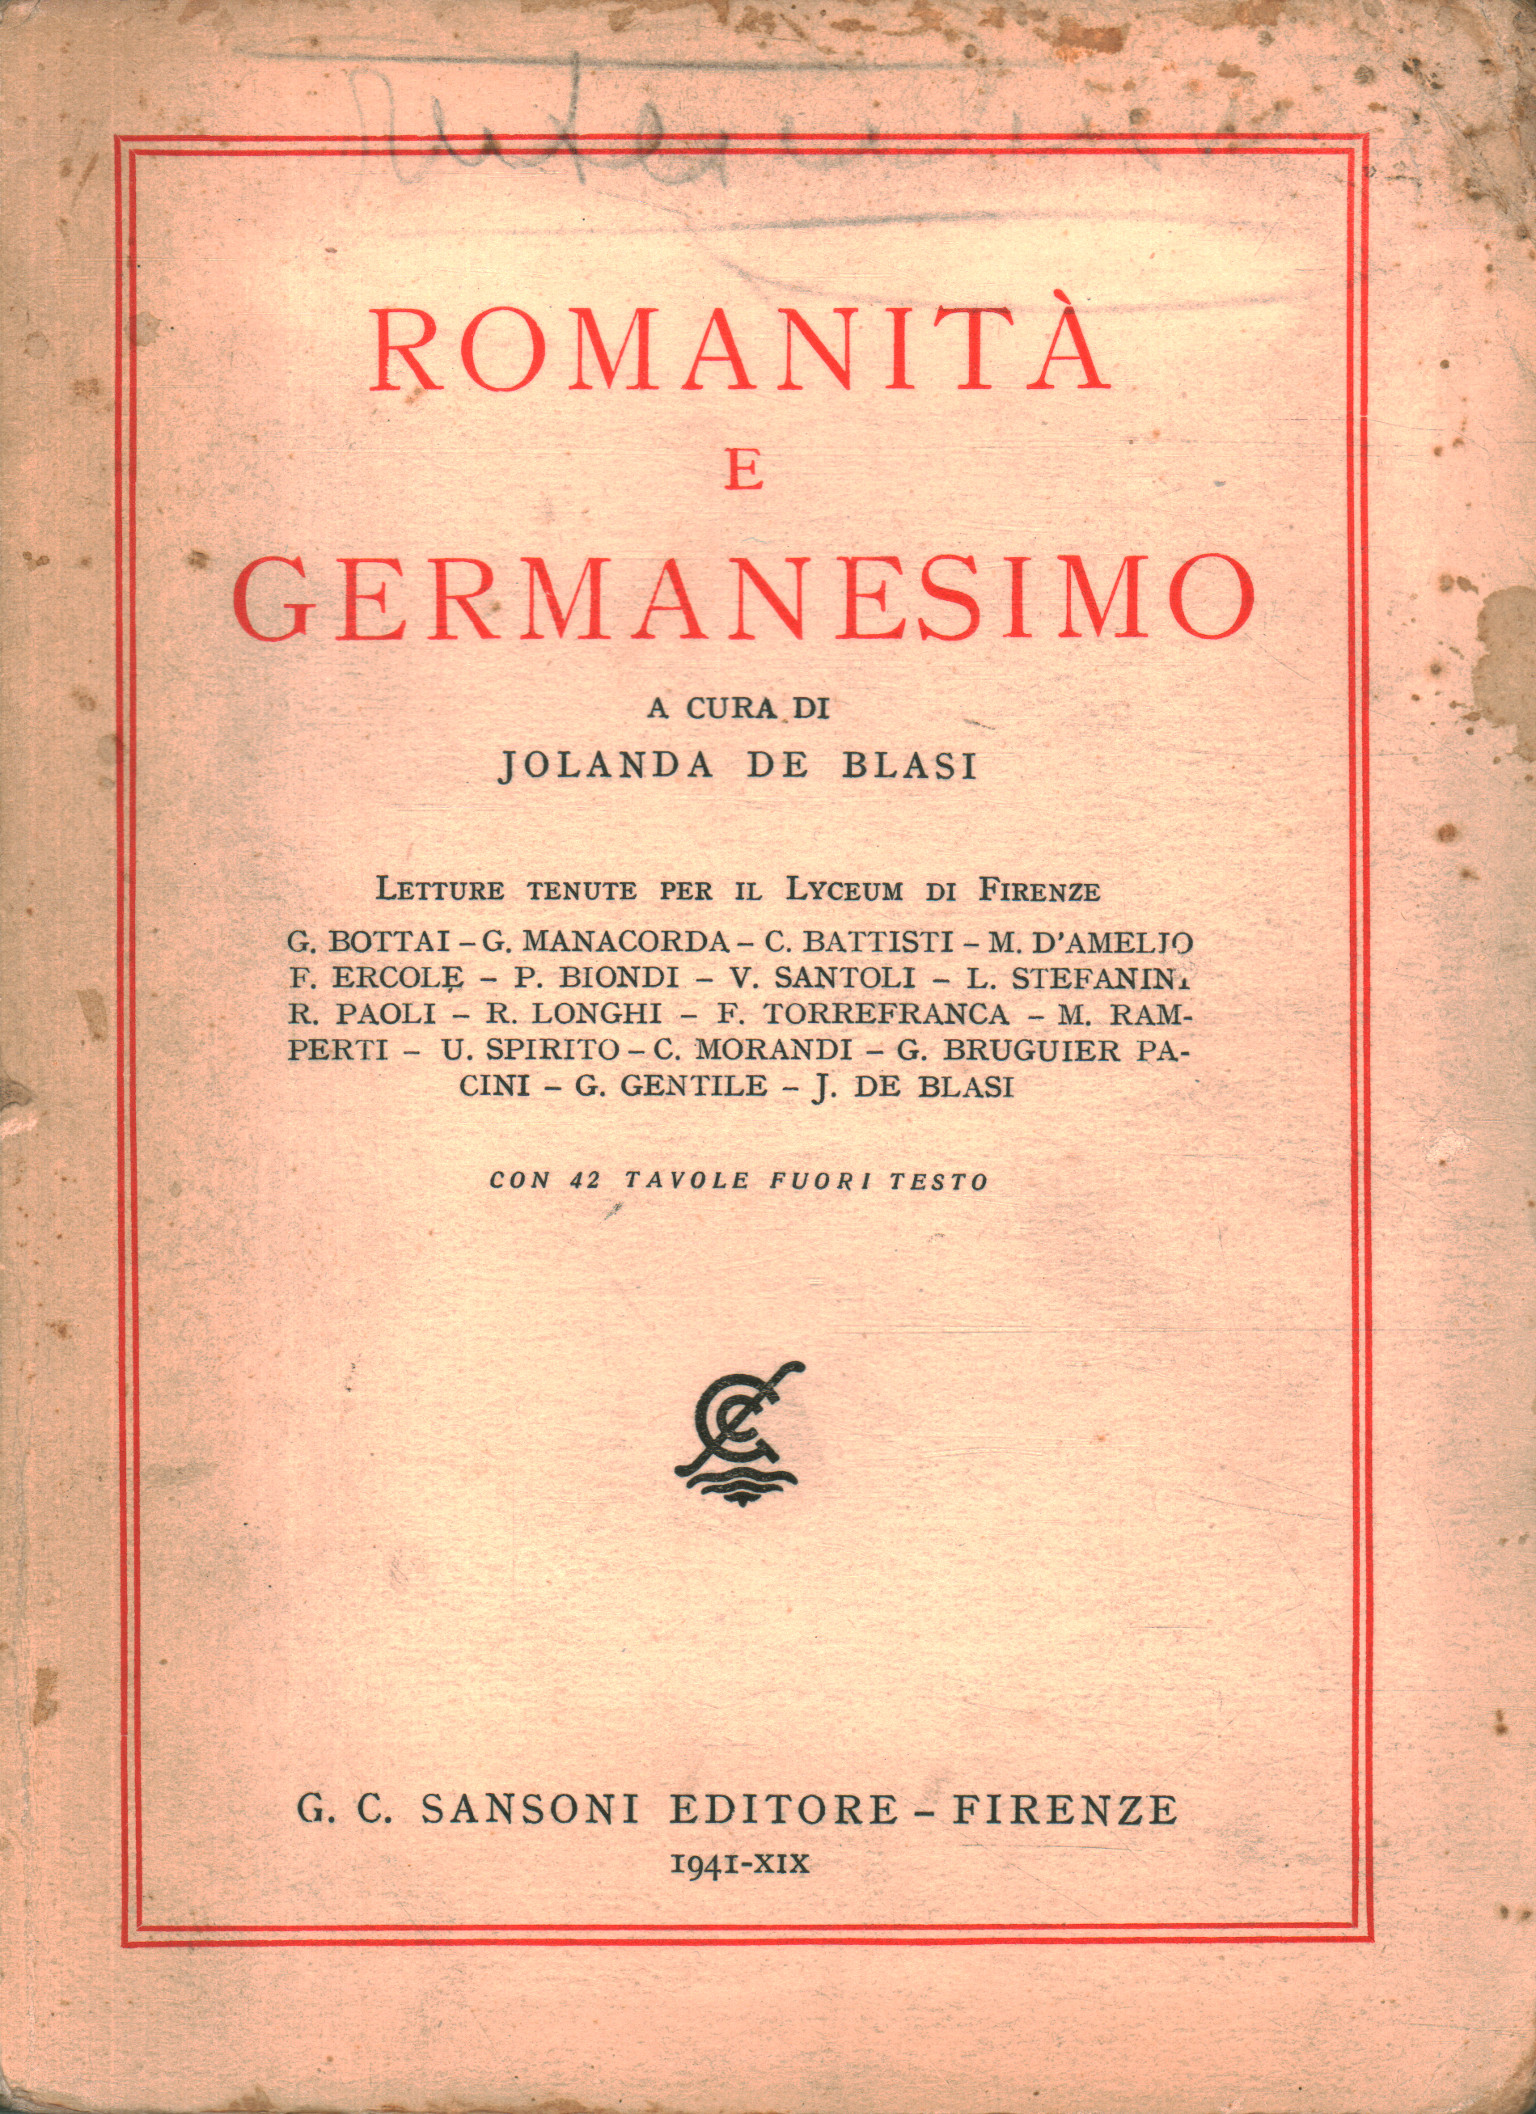 Romanity and Germanism